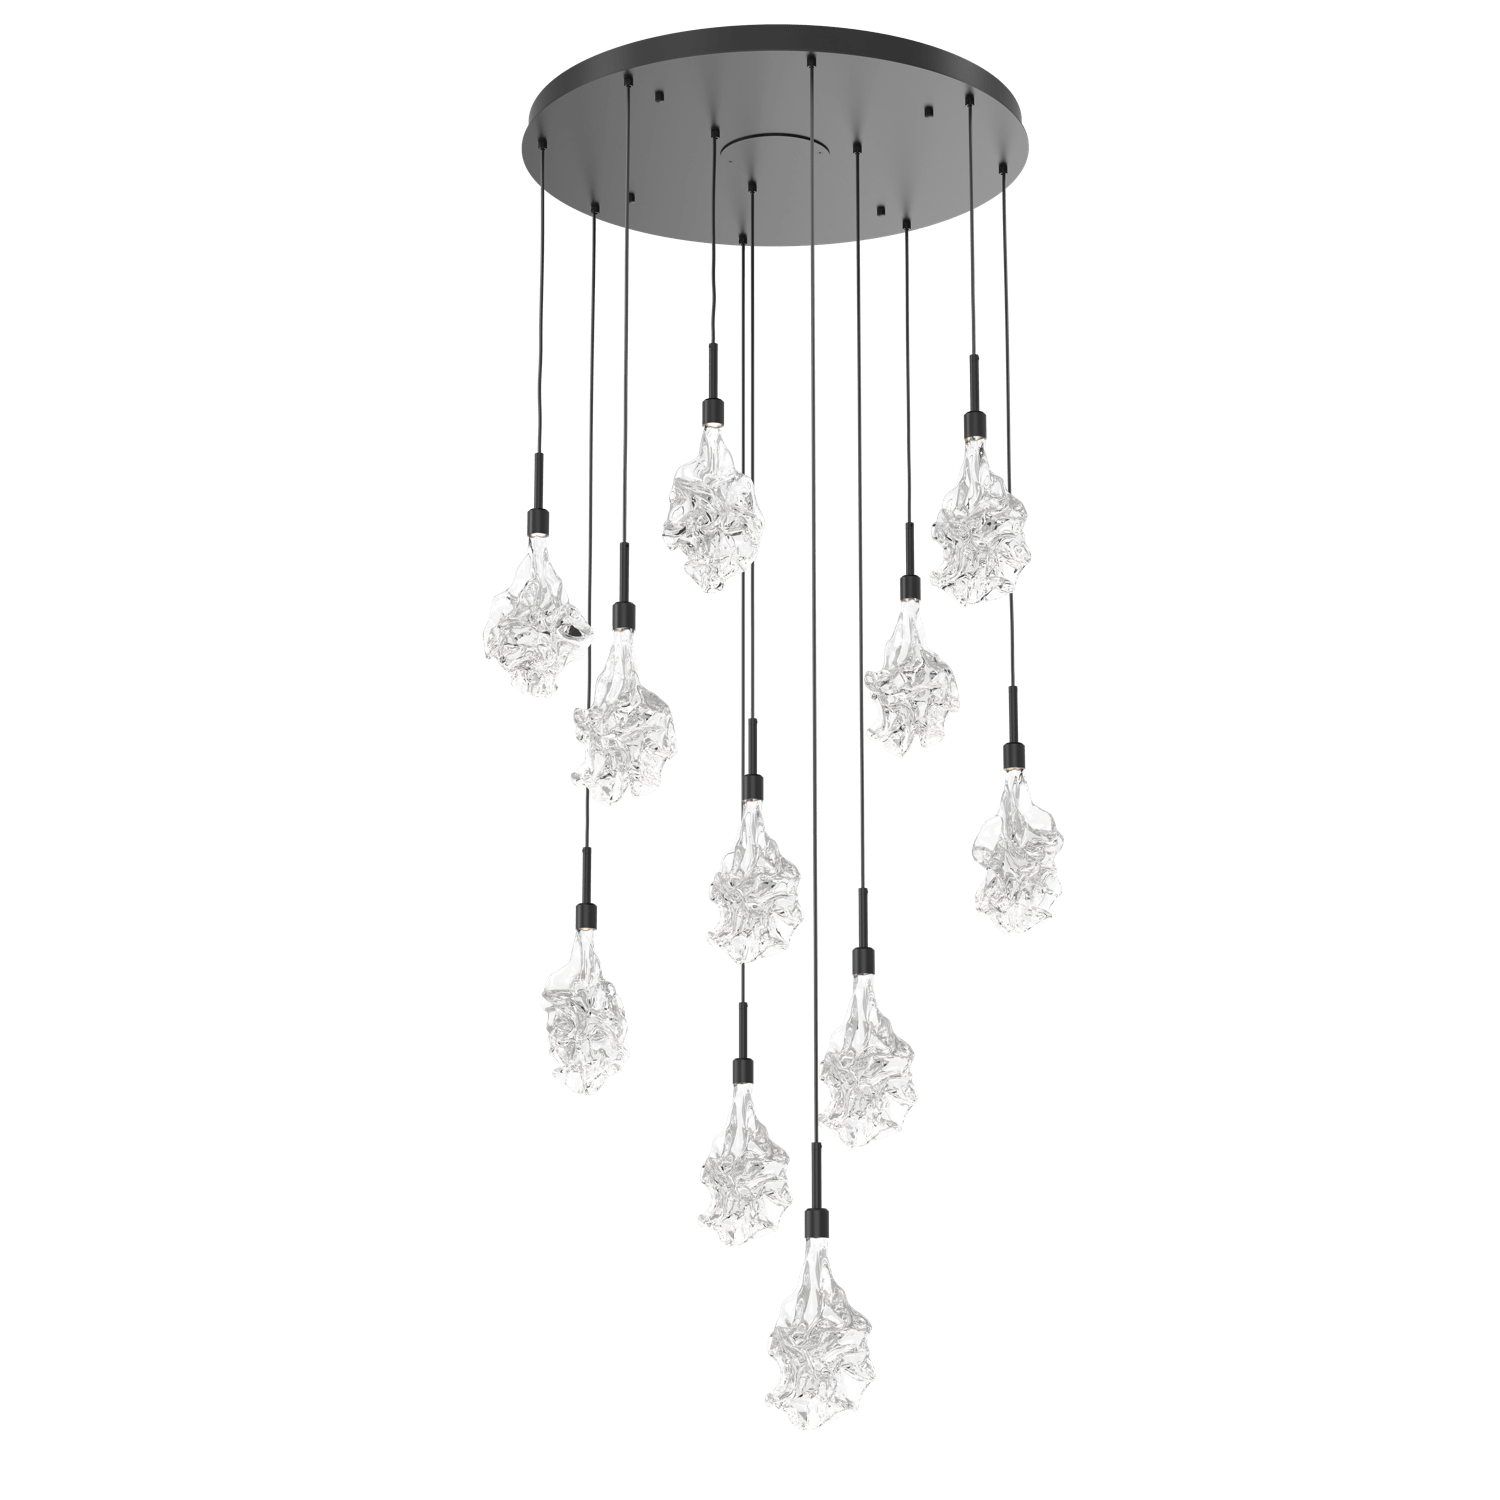 CHB0059-11-MB-Hammerton-Studio-Blossom-11-light-round-pendant-chandelier-with-matte-black-finish-and-clear-handblown-crystal-glass-shades-and-LED-lamping